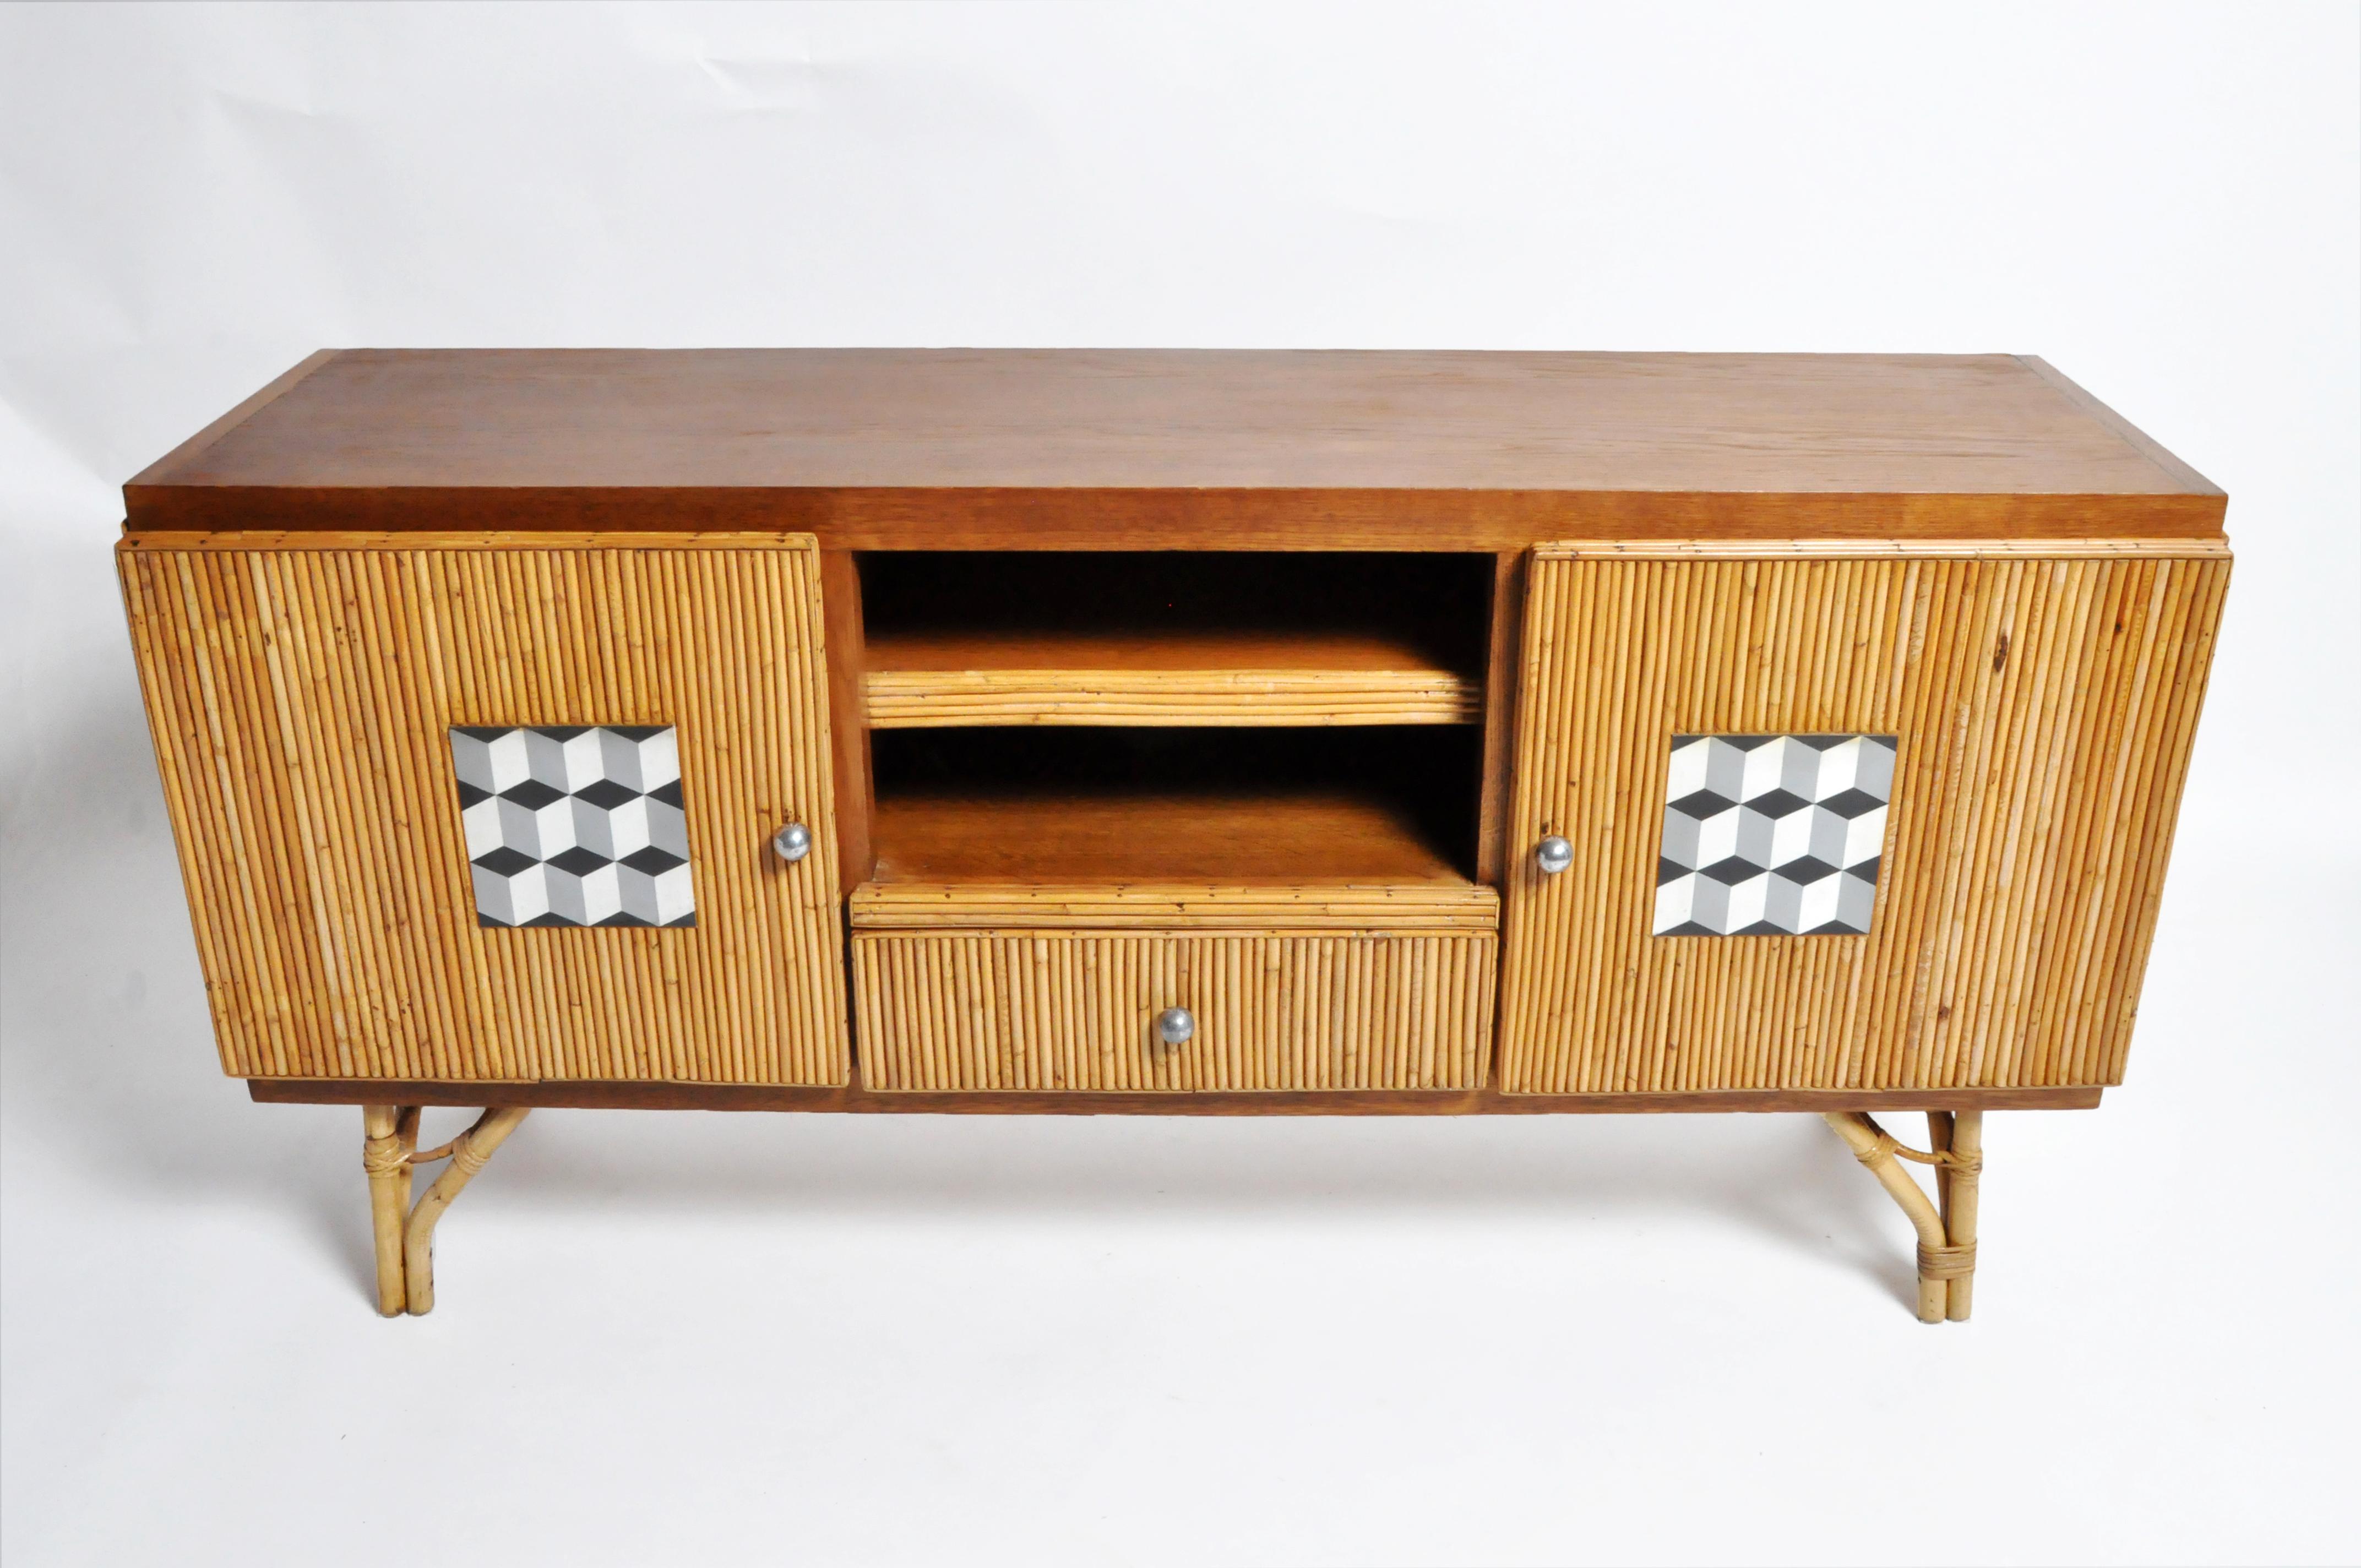 This tropical style “Tiki” sideboard has bamboo legs, a wood frame, a wood top and a decorative geometric-patterned insert on each door. This piece is from France and was made from bamboo and rattan, circa 1960. Knobs, made from brushed steel, are